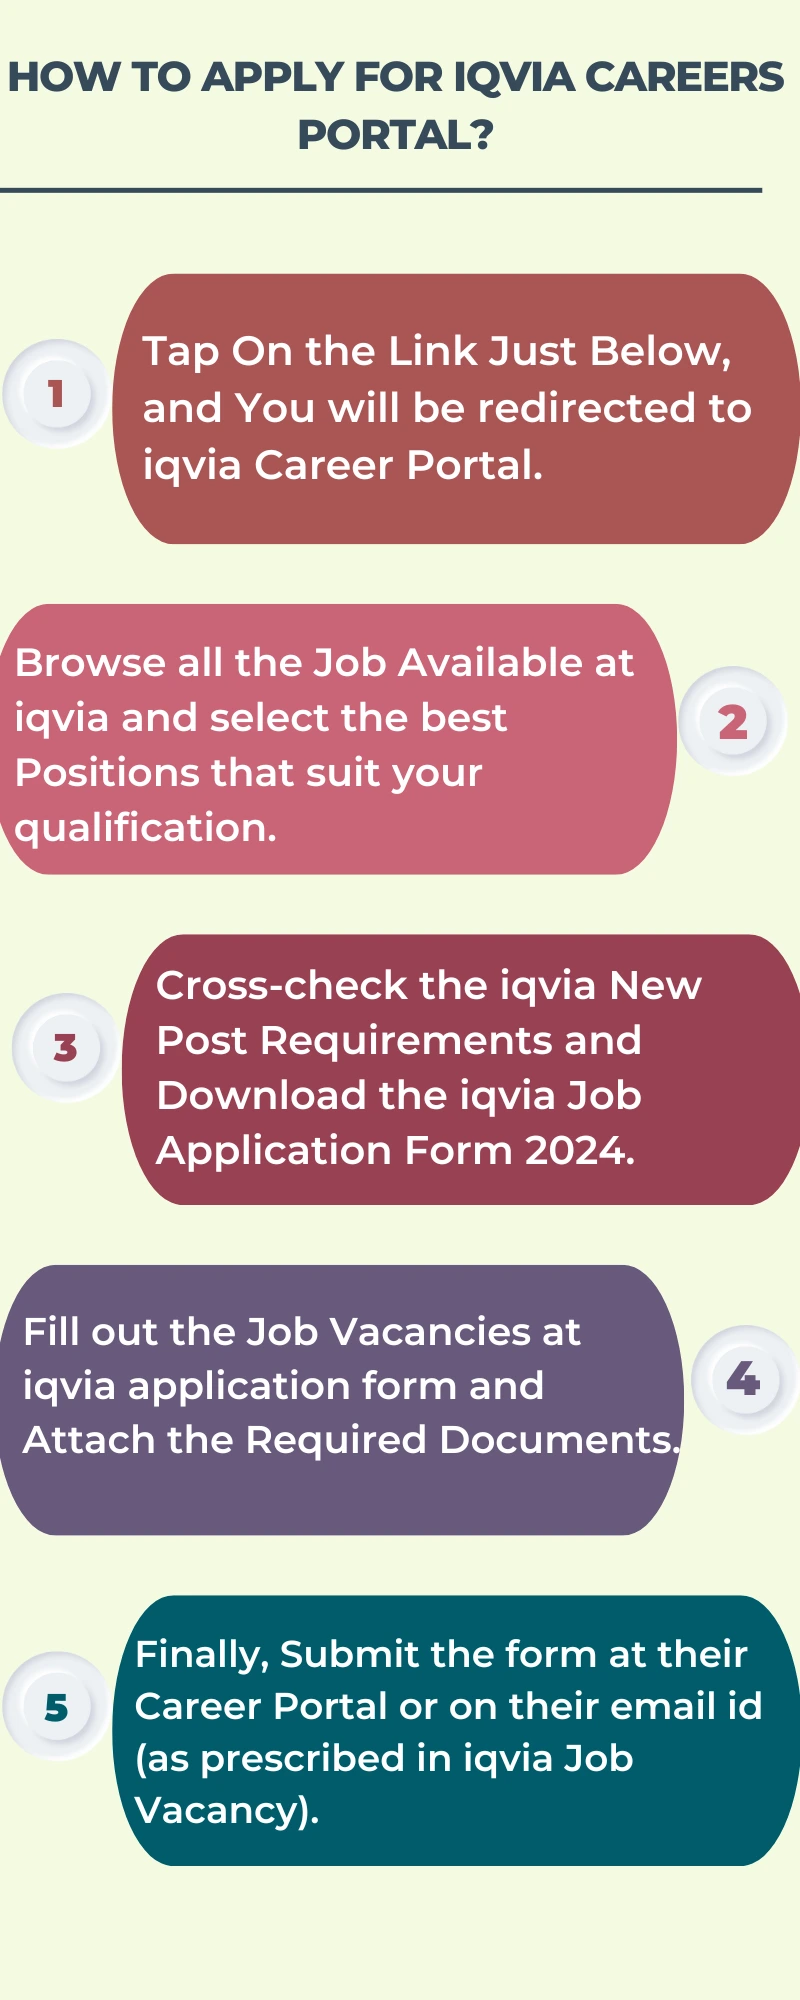 How To Apply for iqvia Careers Portal?